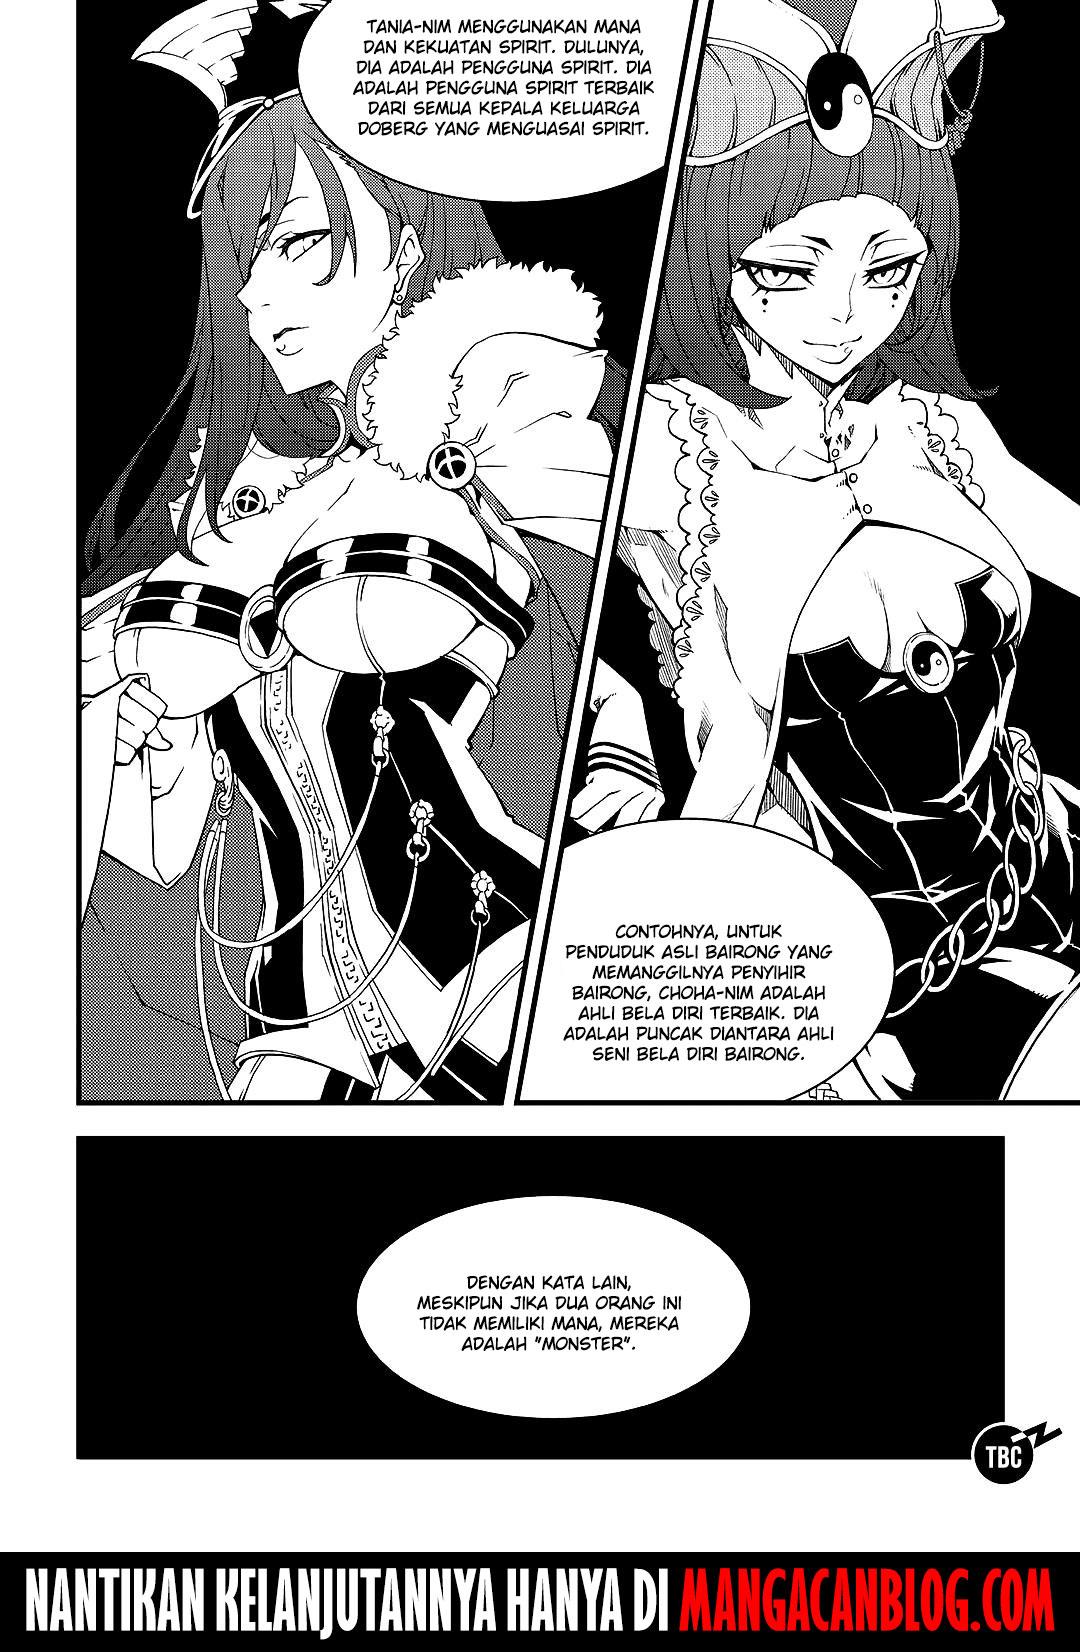 Witch Hunter Chapter 208